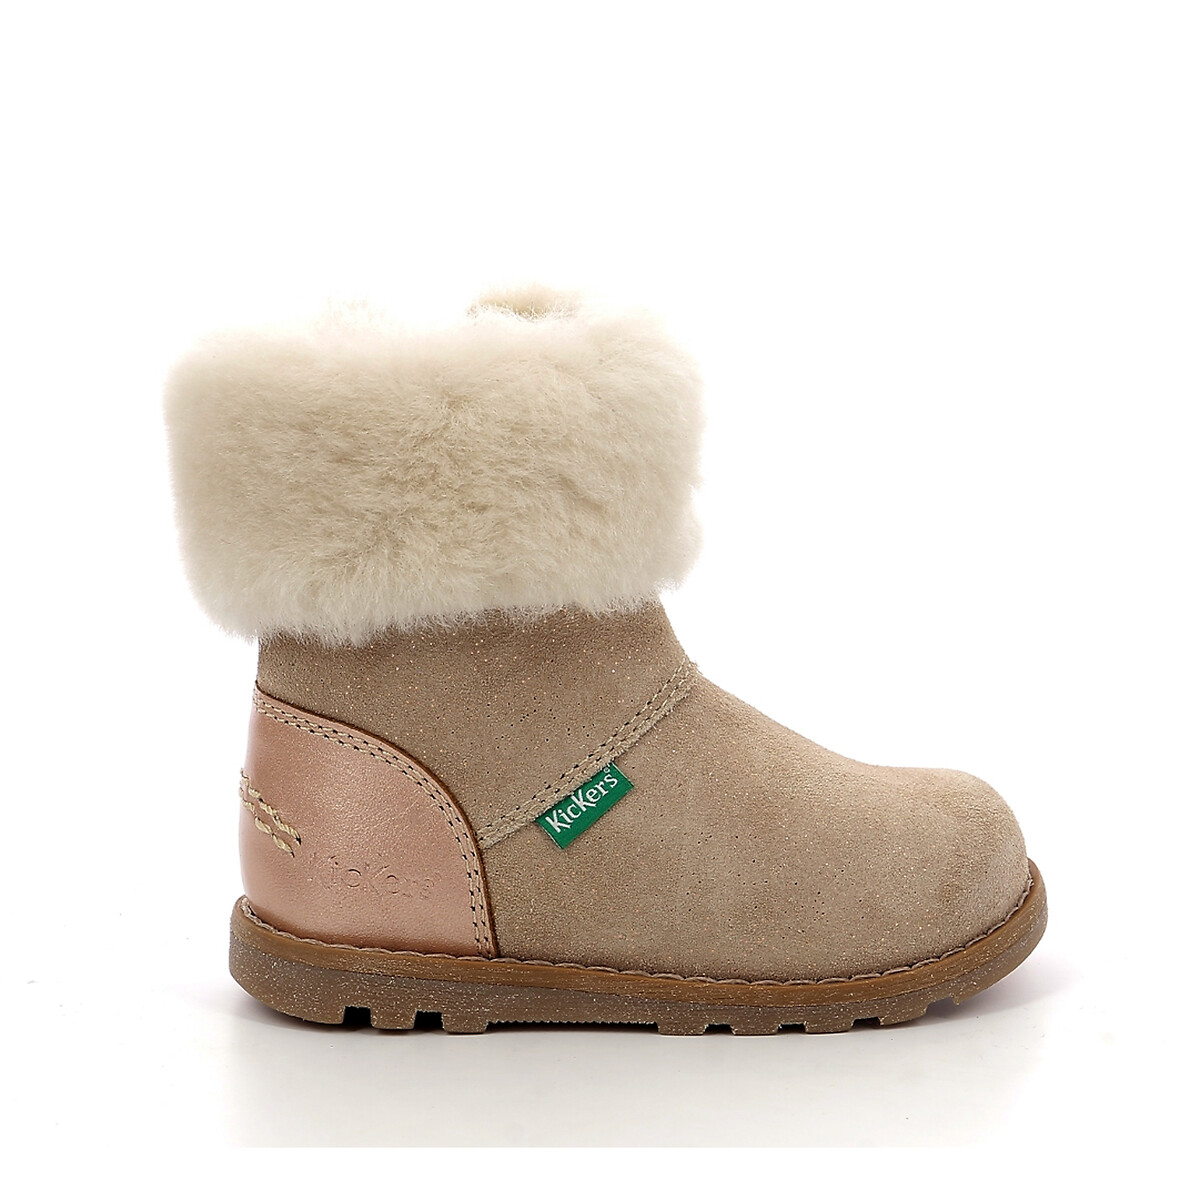 Kids Nonofur Calf Boots in Leather with Faux Fur Lining